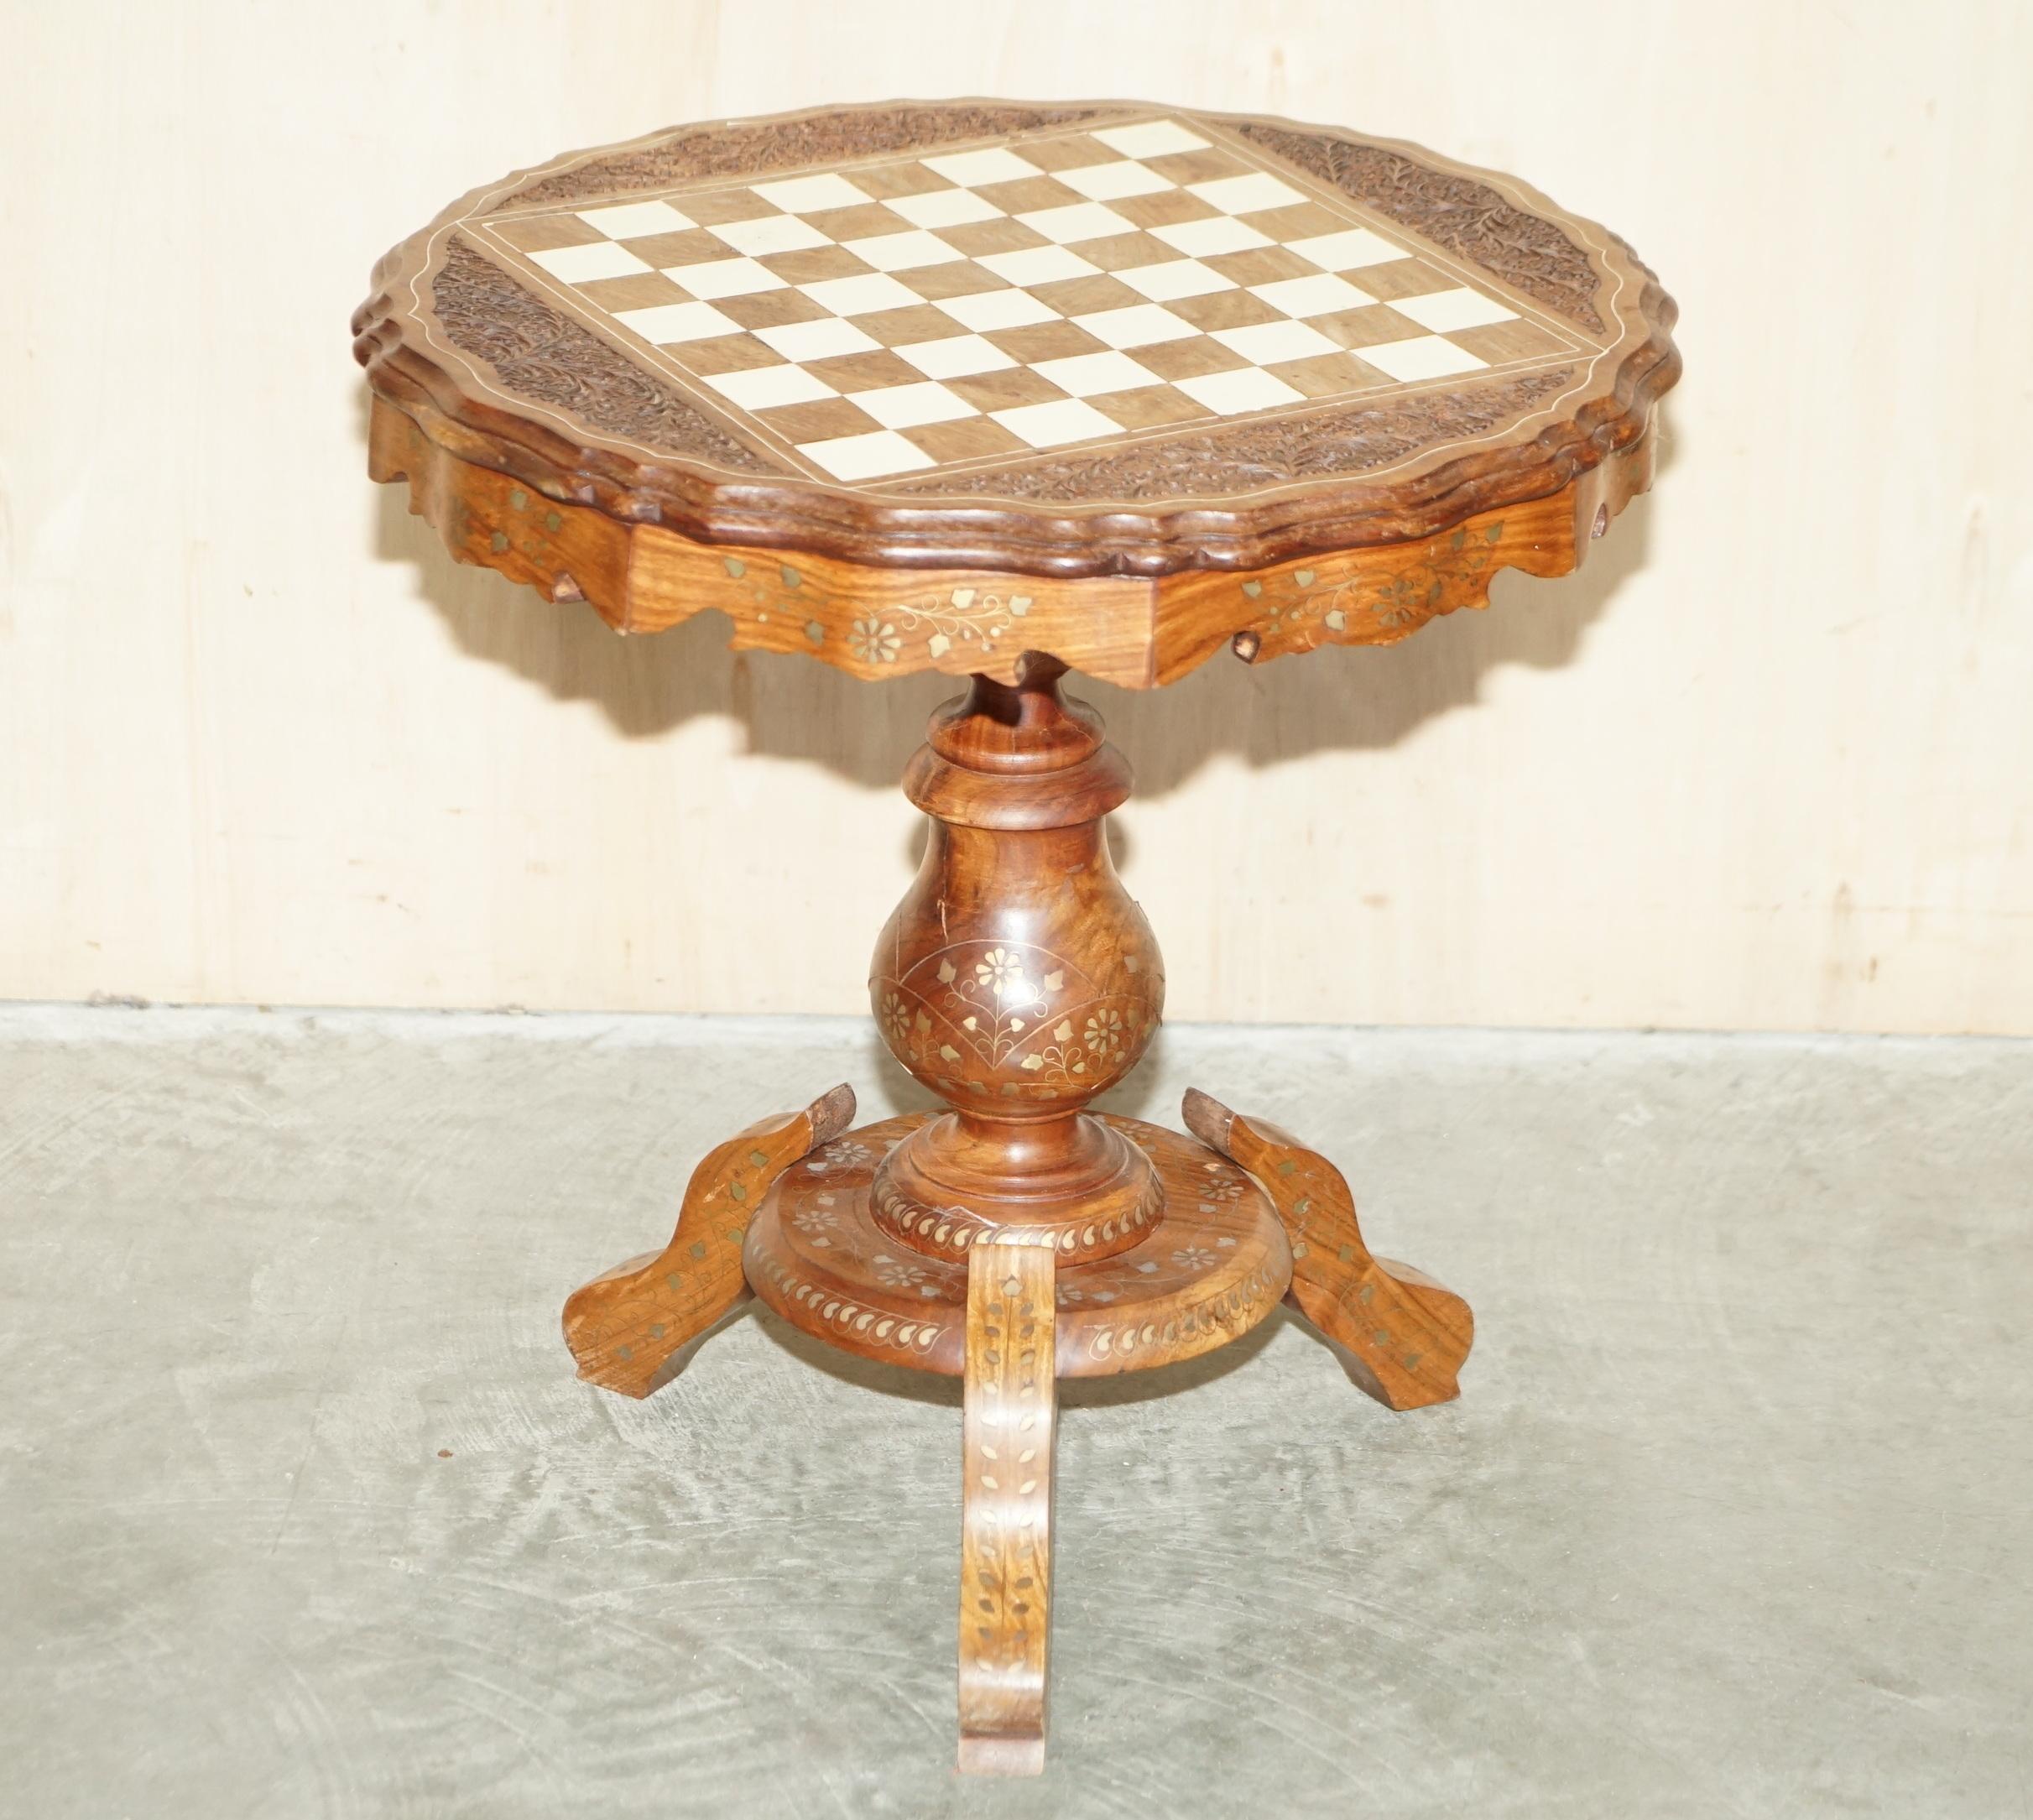 We are delighted to offer for sale this lovely Victorian Anglo Indian Rosewood with brass inlay Chess games table.

A very good looking well-made and function piece of furniture, extremely decorative, the whole piece is solid Rosewood and it has